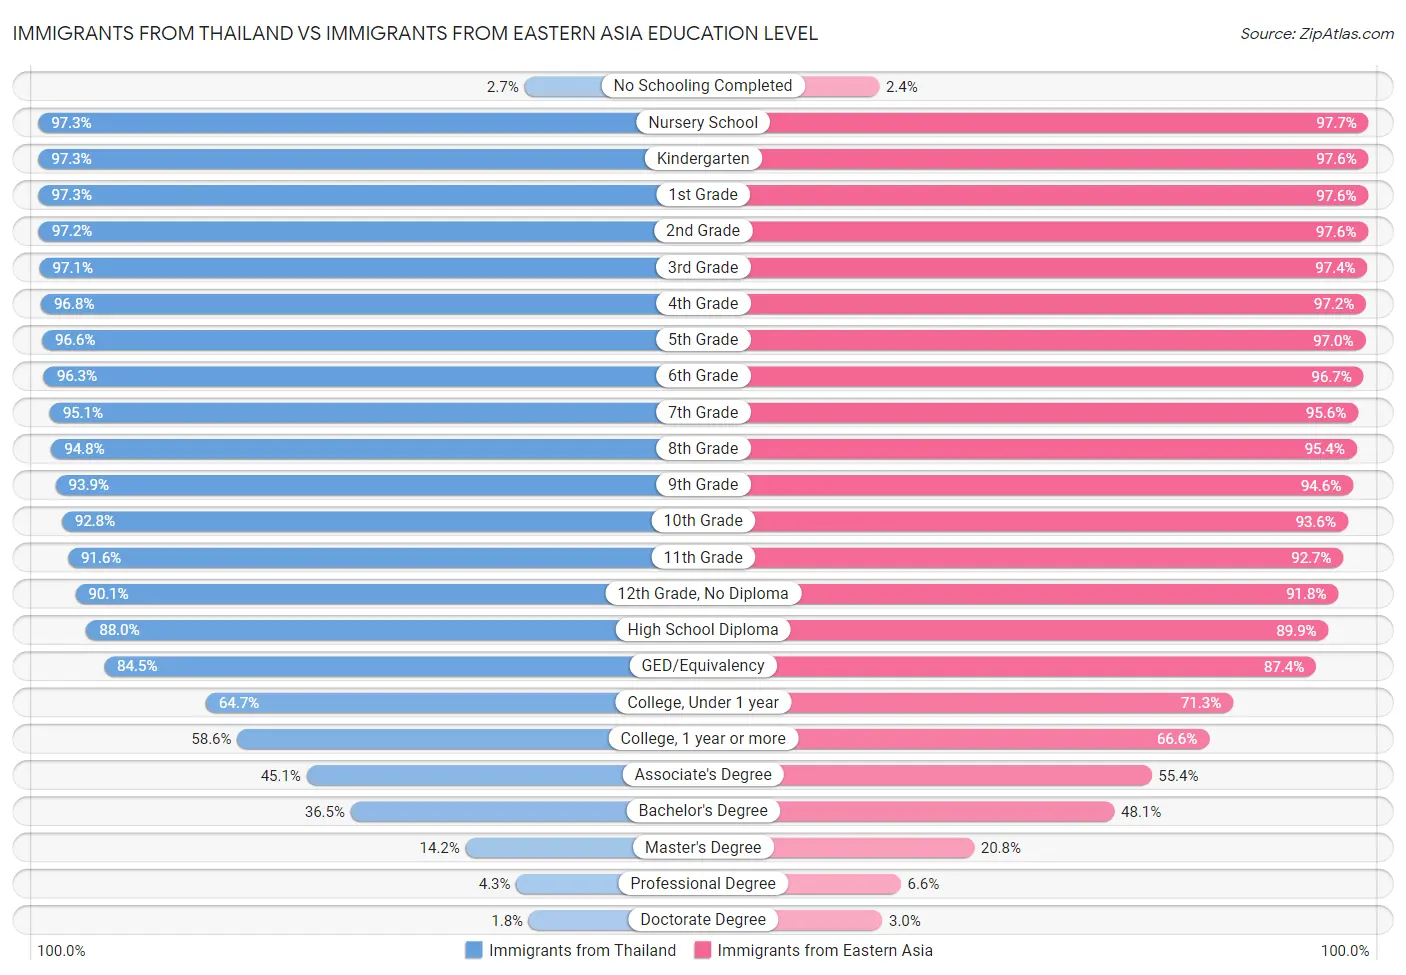 Immigrants from Thailand vs Immigrants from Eastern Asia Education Level